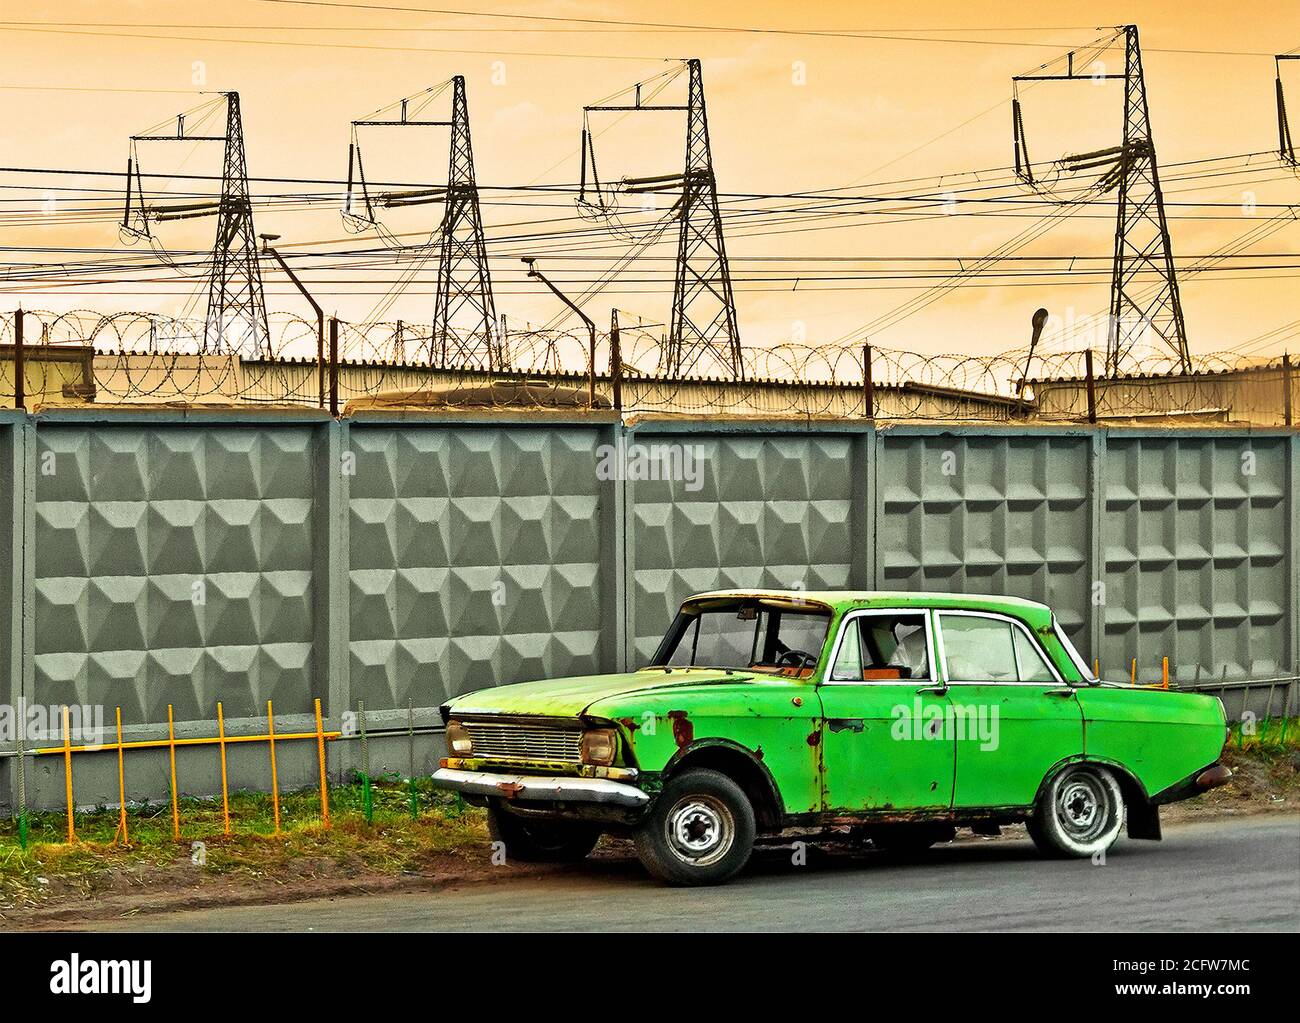 industrial view with an oldtimer car Stock Photo